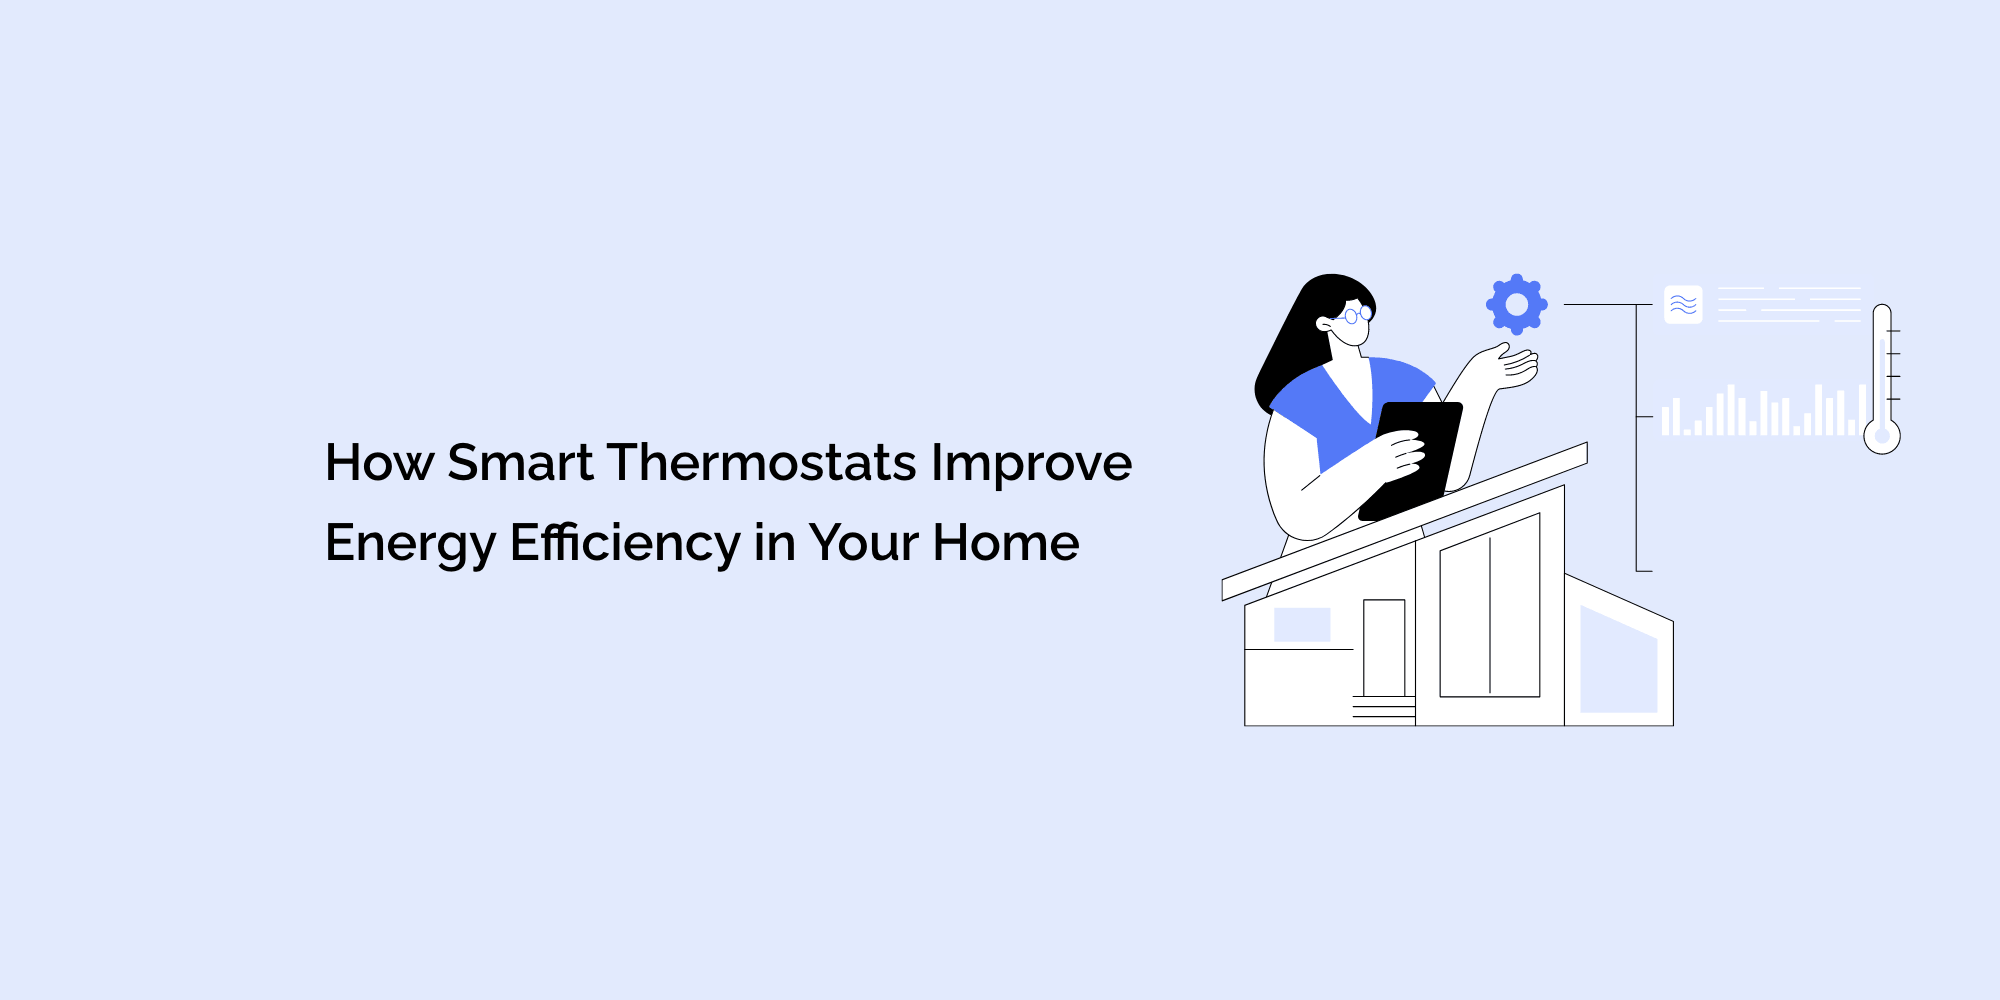 How Smart Thermostats Improve Energy Efficiency in Your Home